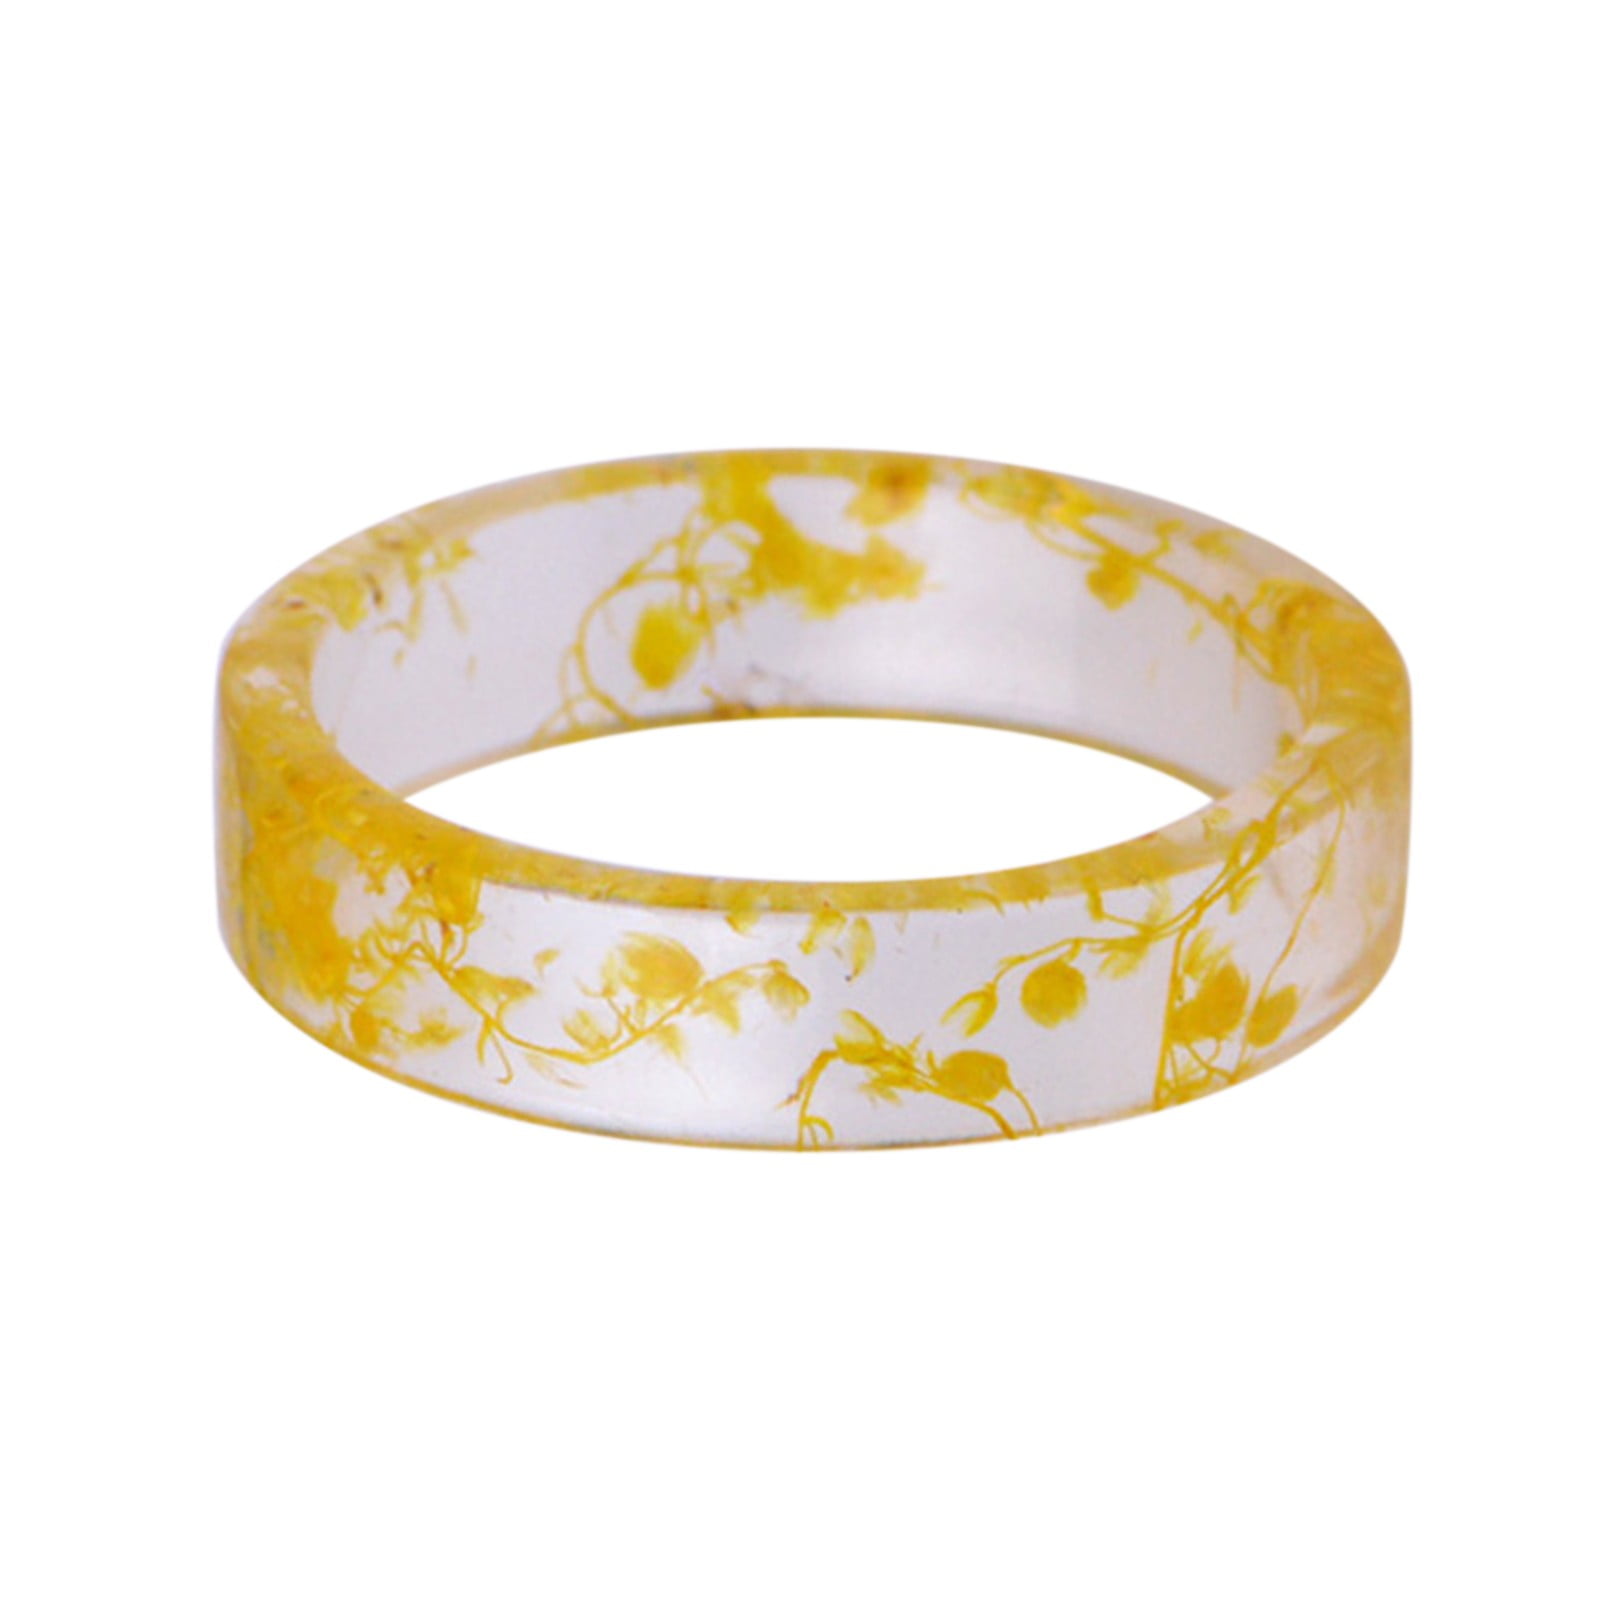 Mnjin Resin Ring Beautiful Flower Resin Rings Gift For Women And Men  Fashion Jewelry Special Gifts B 